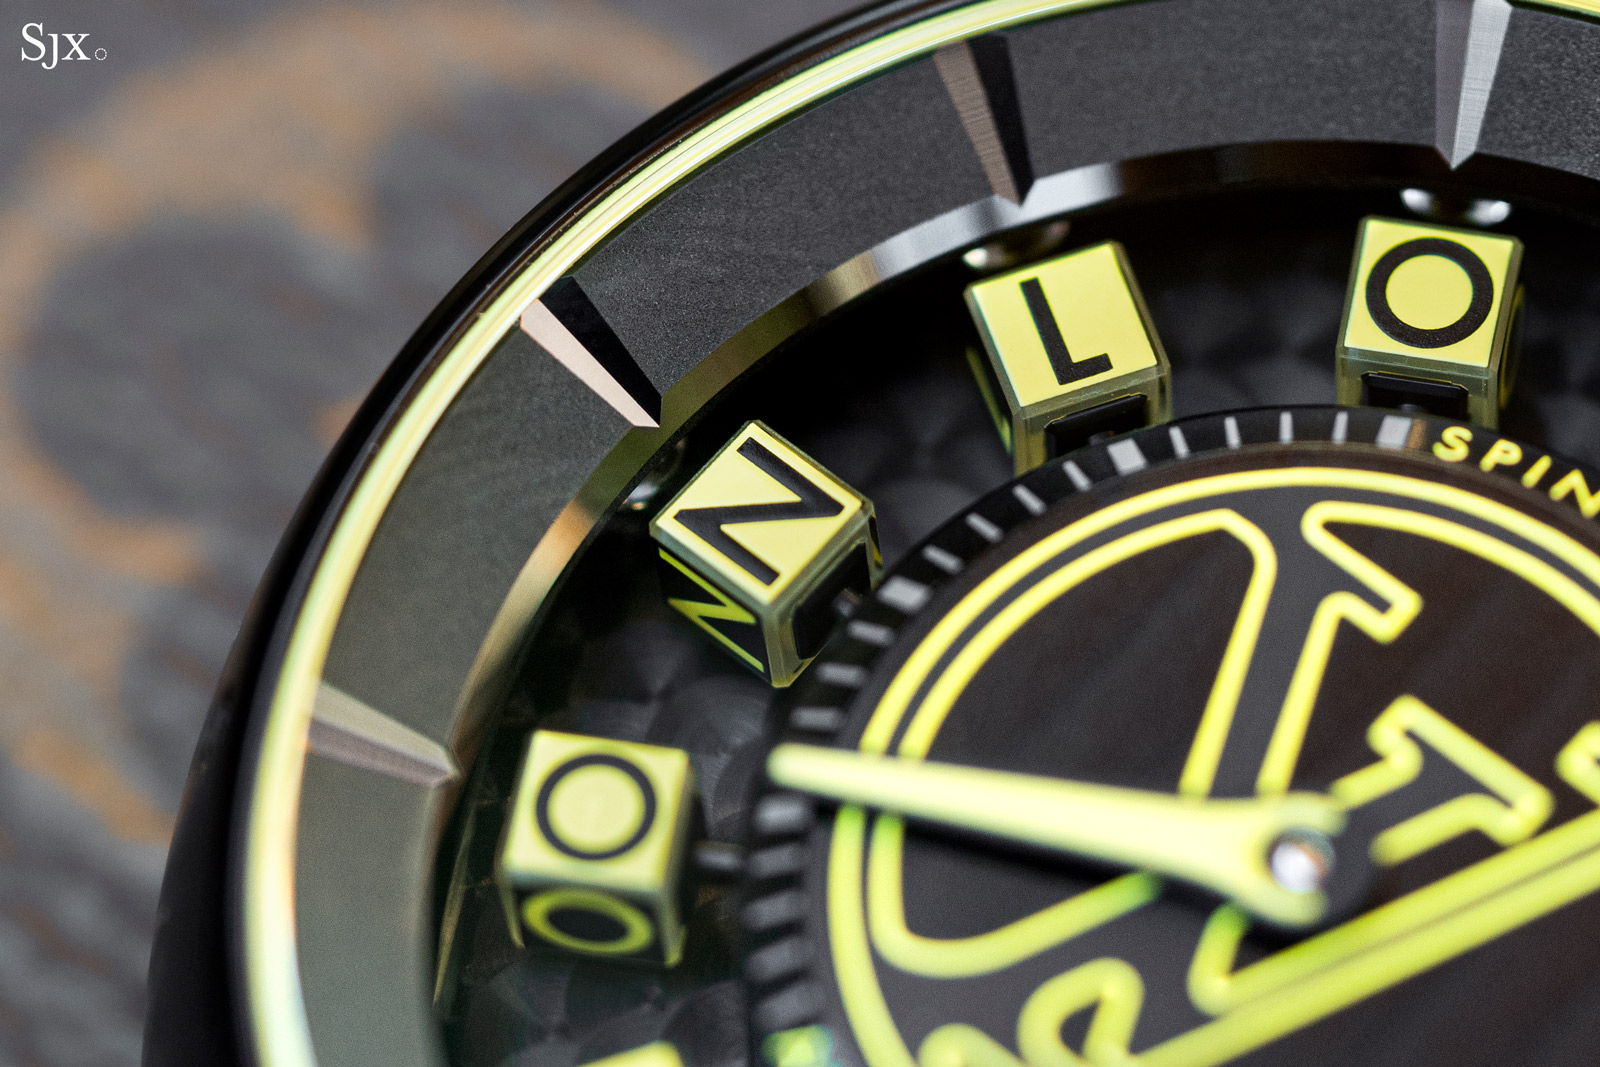 Louis Vuitton Tambour Spin Time Air Quantum: “Lit” Non-Traditional High  Watchmaking - Reprise - Quill & Pad